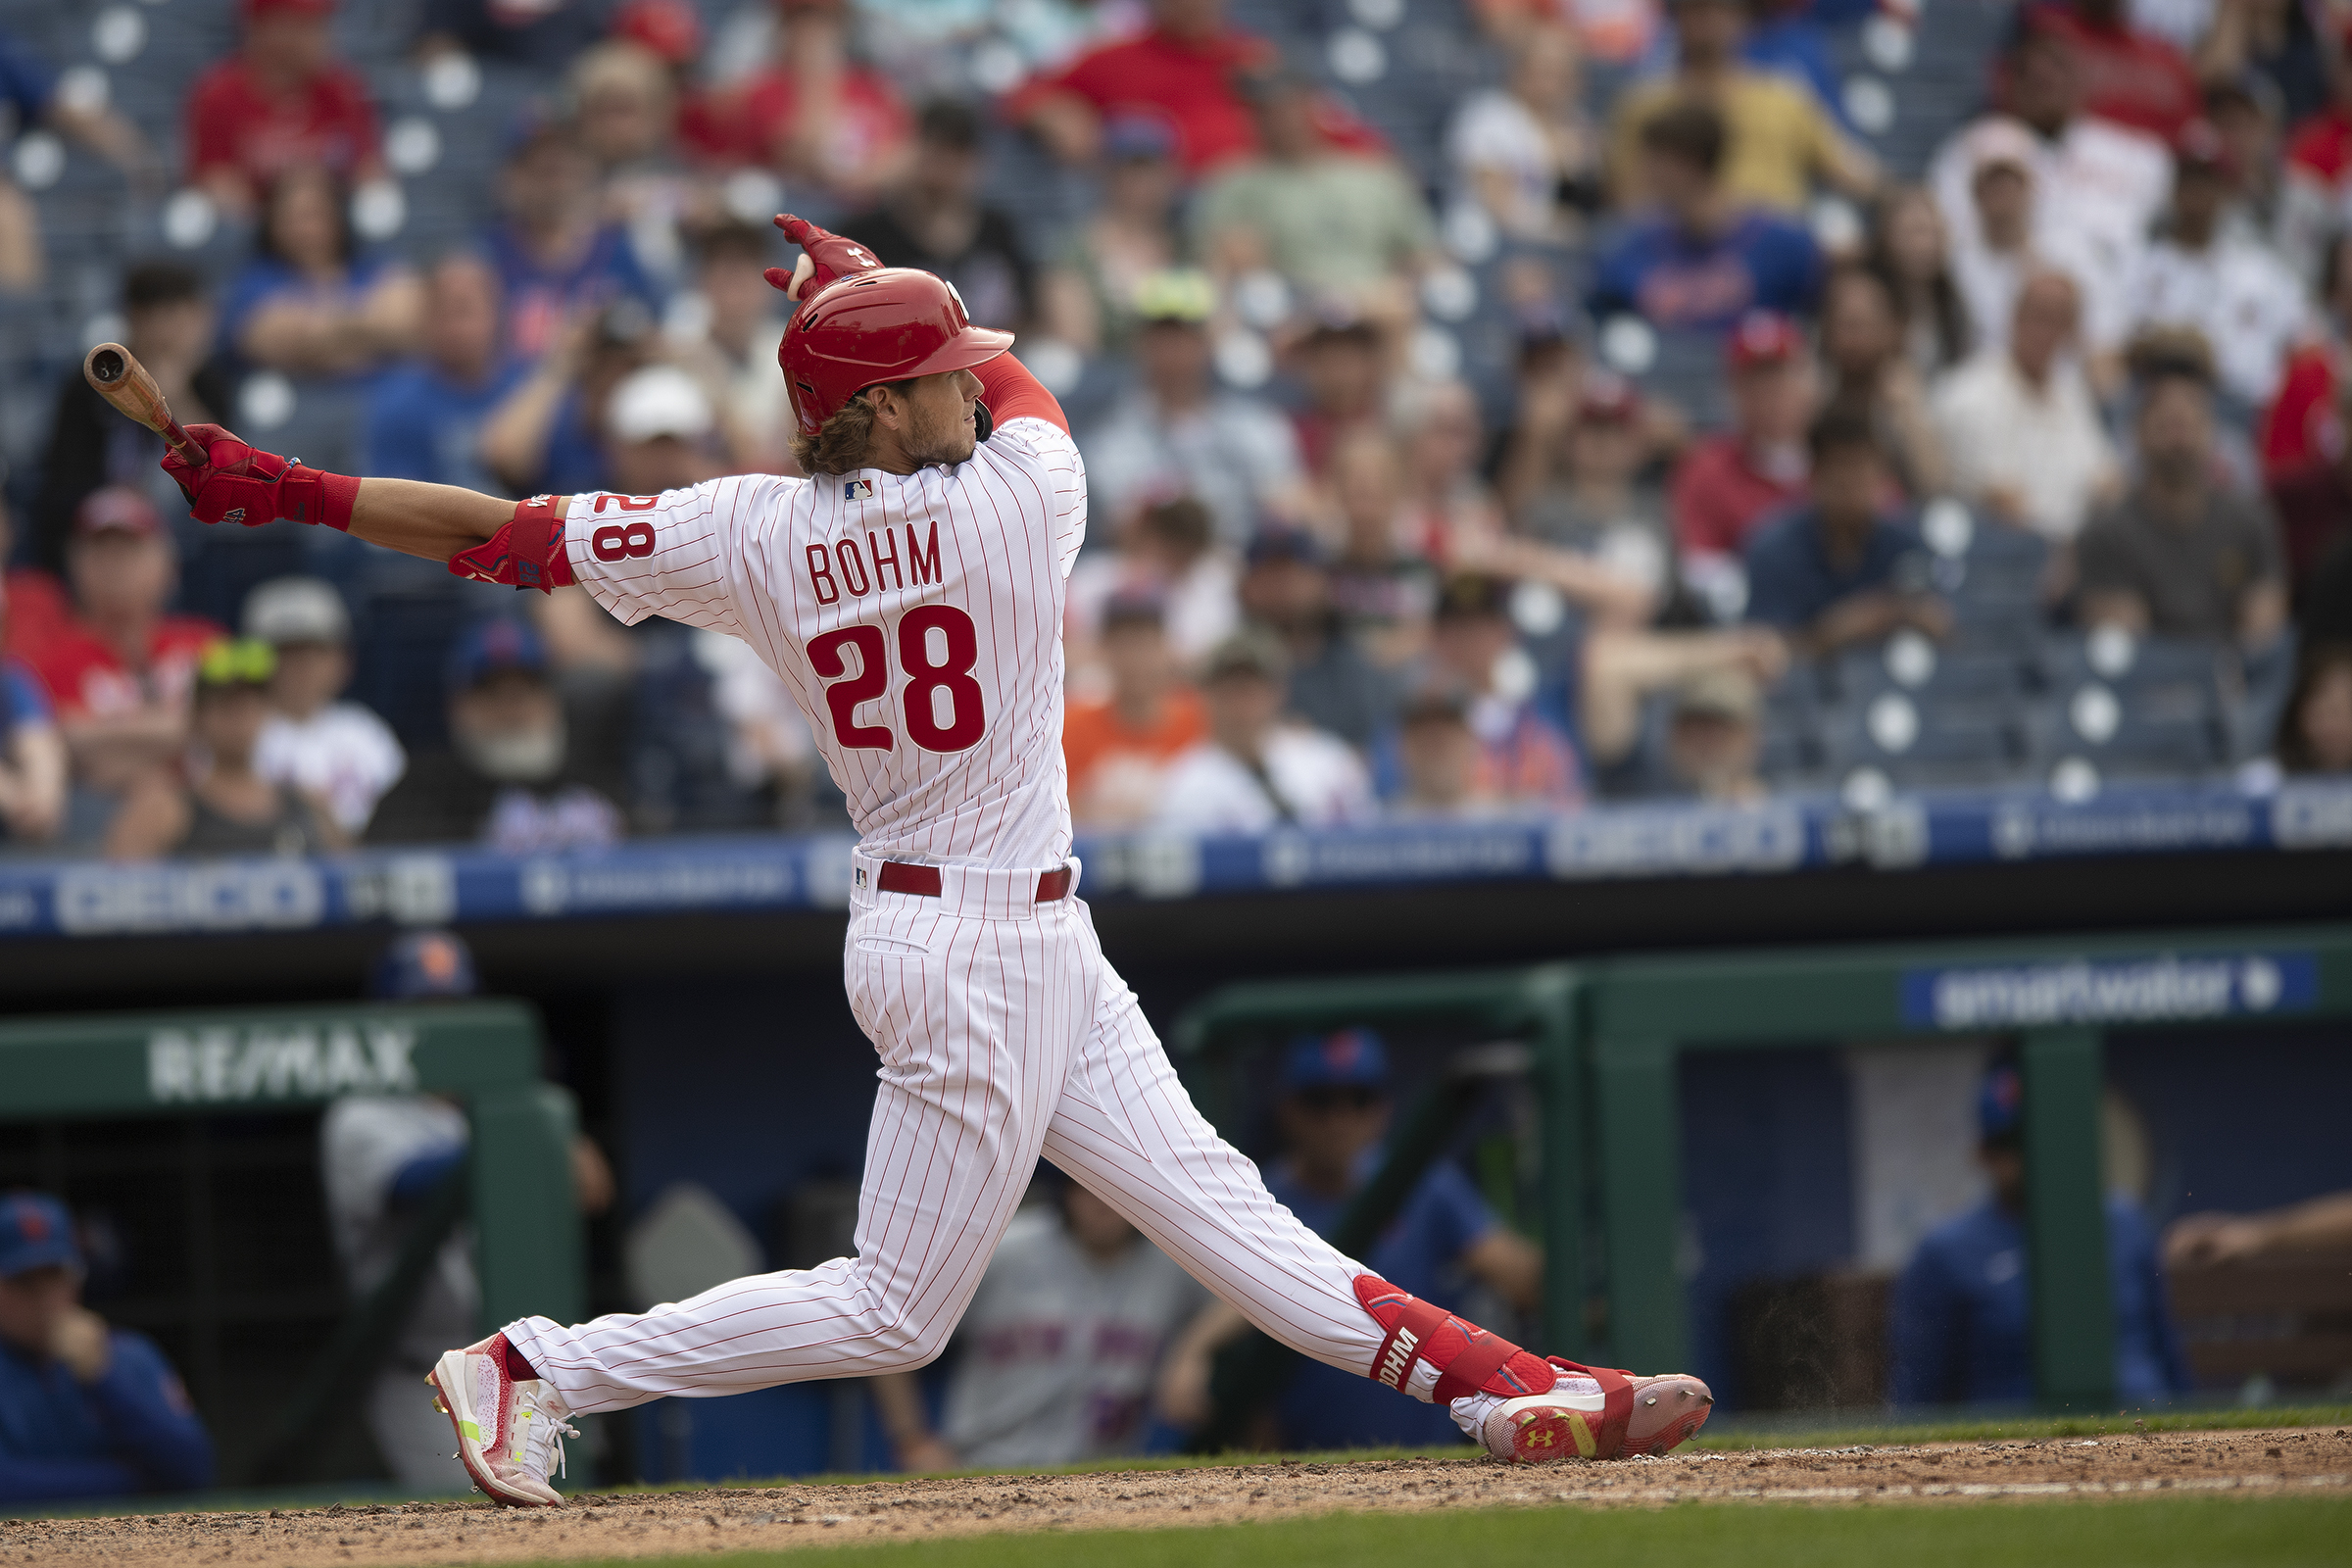 Phillies Nation on X: Alec Bohm now has the strongest elbow in